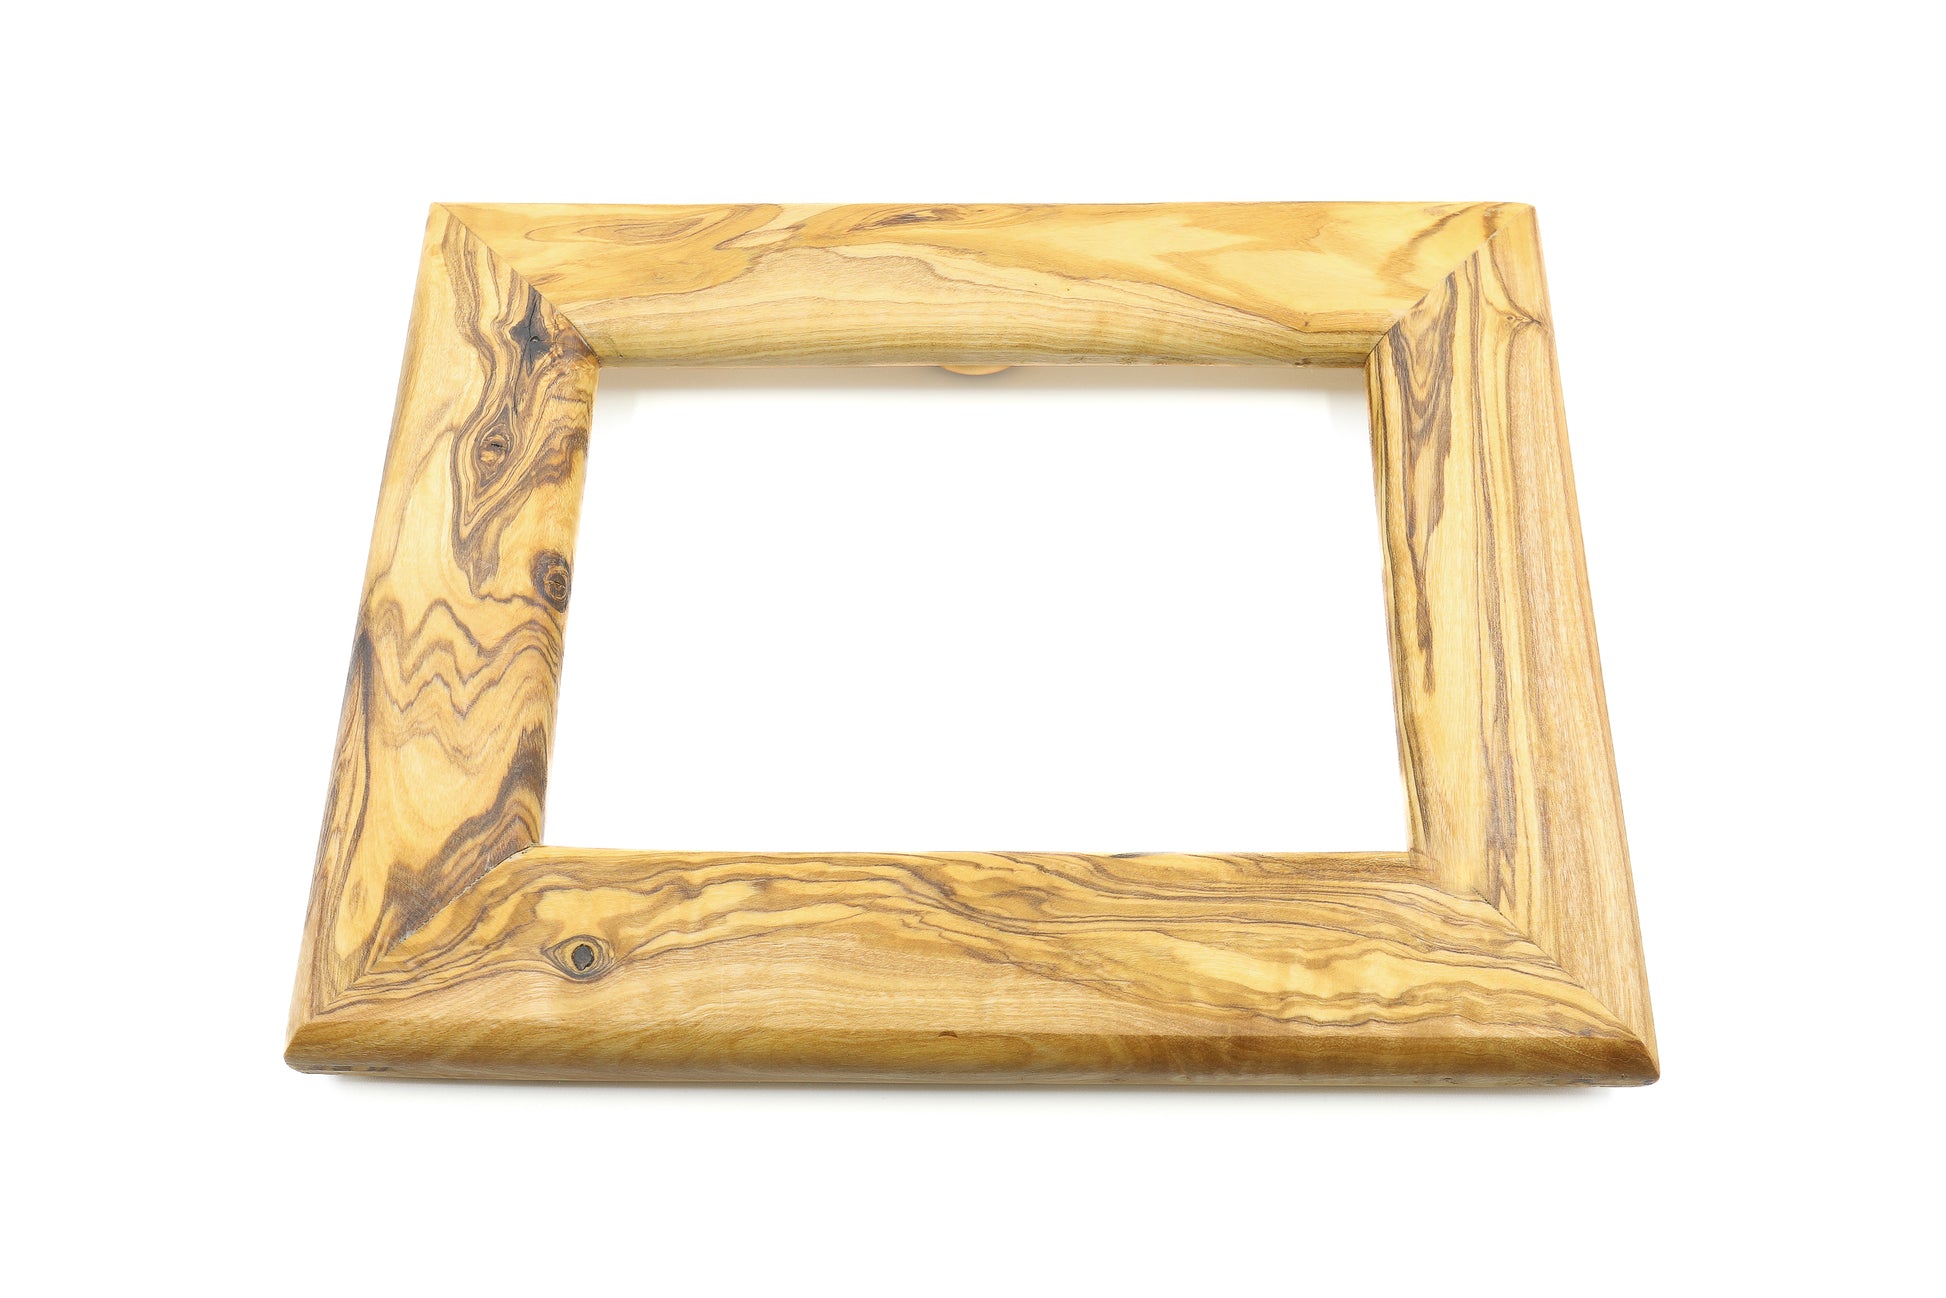 Unique vintage-style picture frame made from olive wood